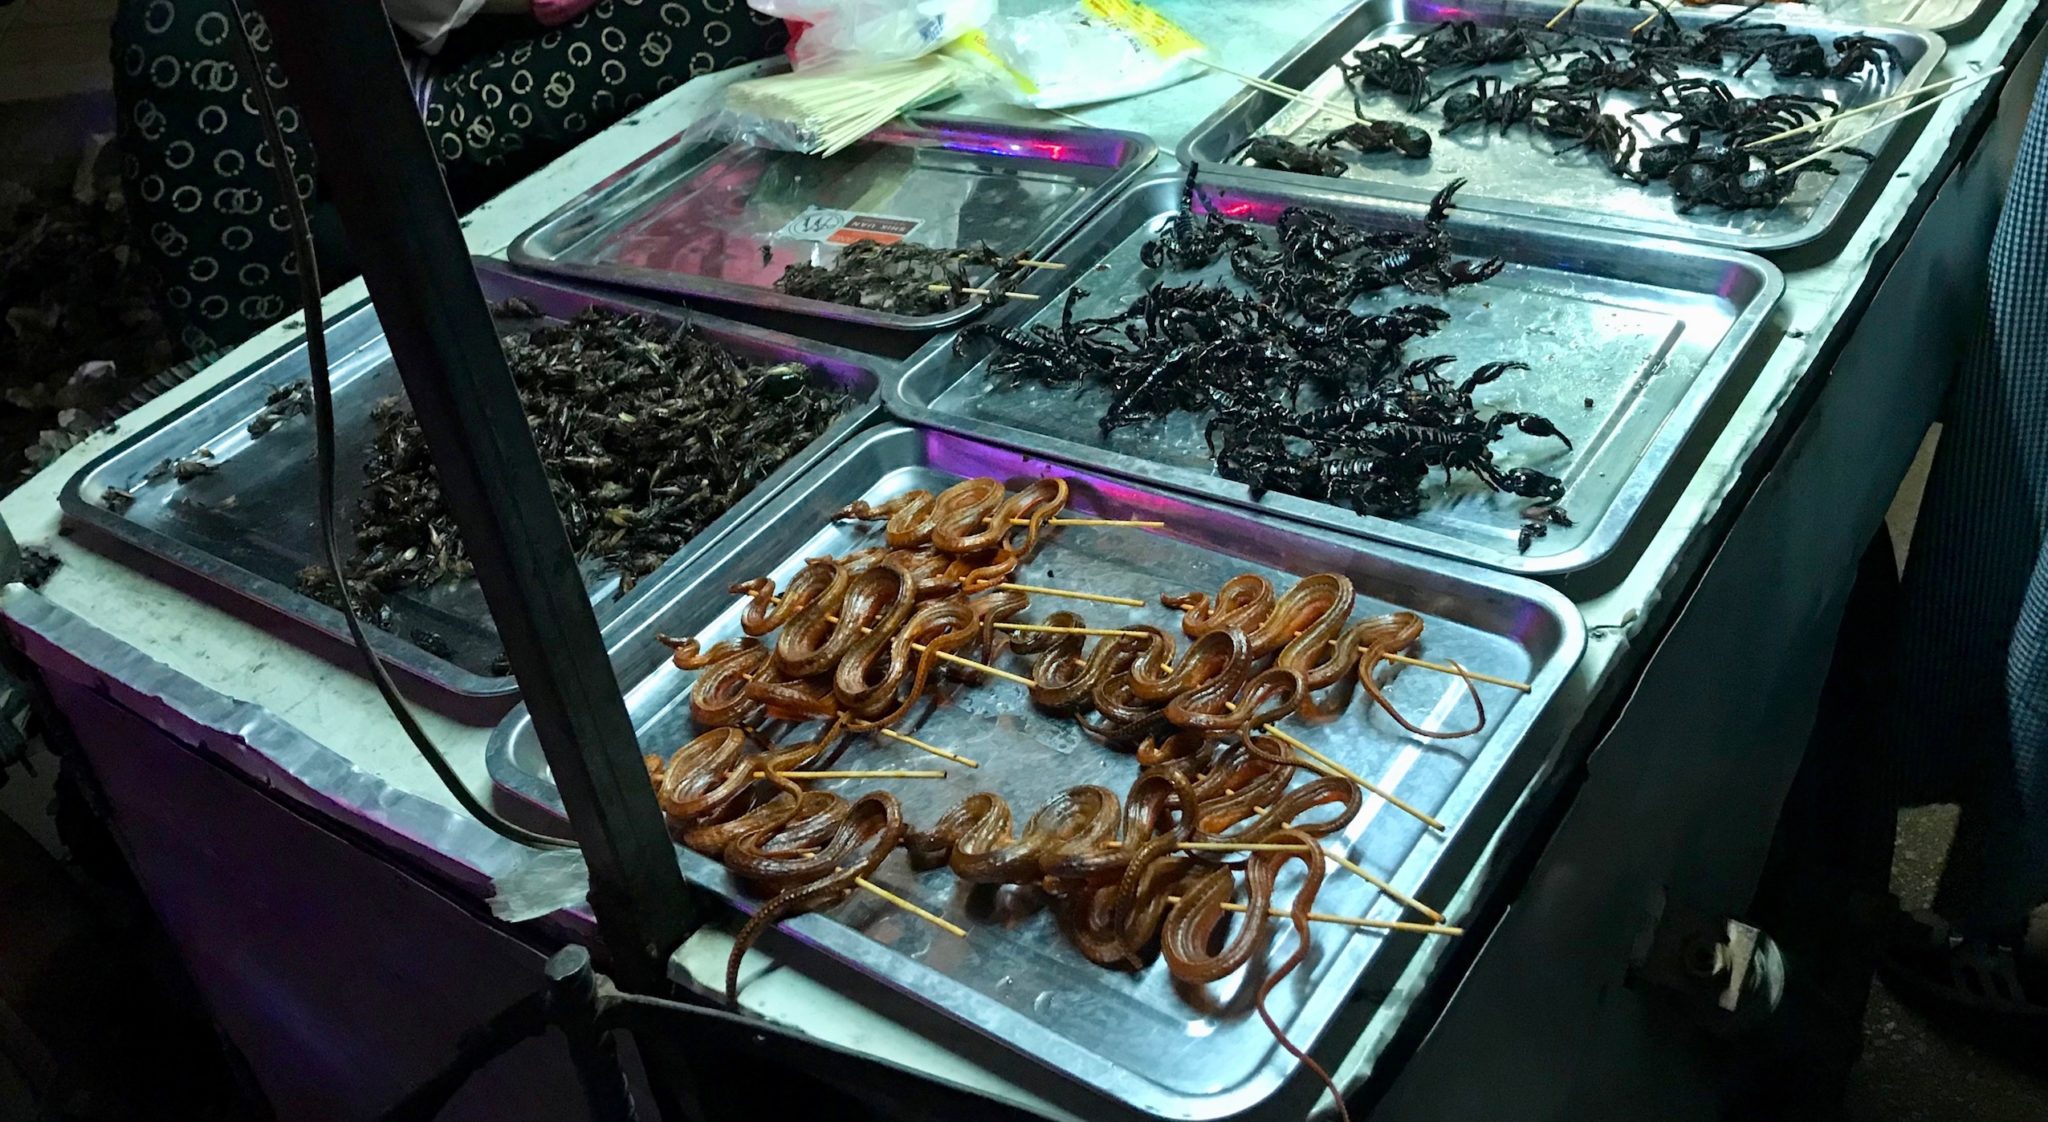 Fried scorpions and snakes at a market stall